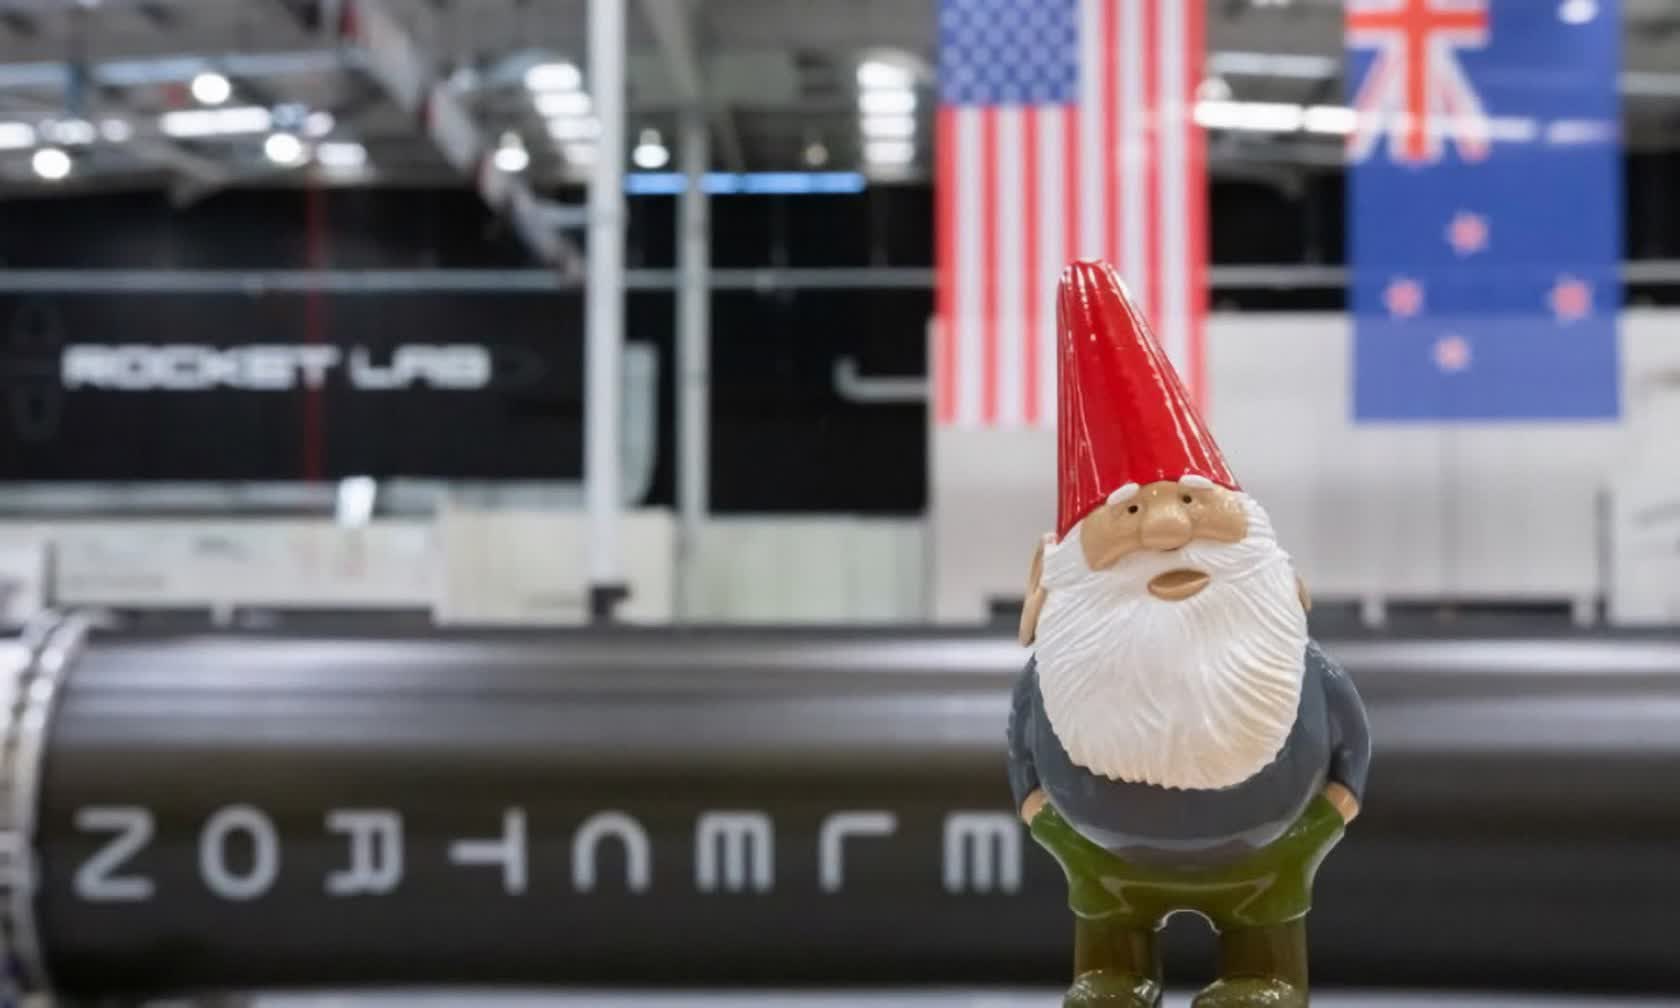 Valve CEO Gabe Newell will launch a garden gnome into space for charity